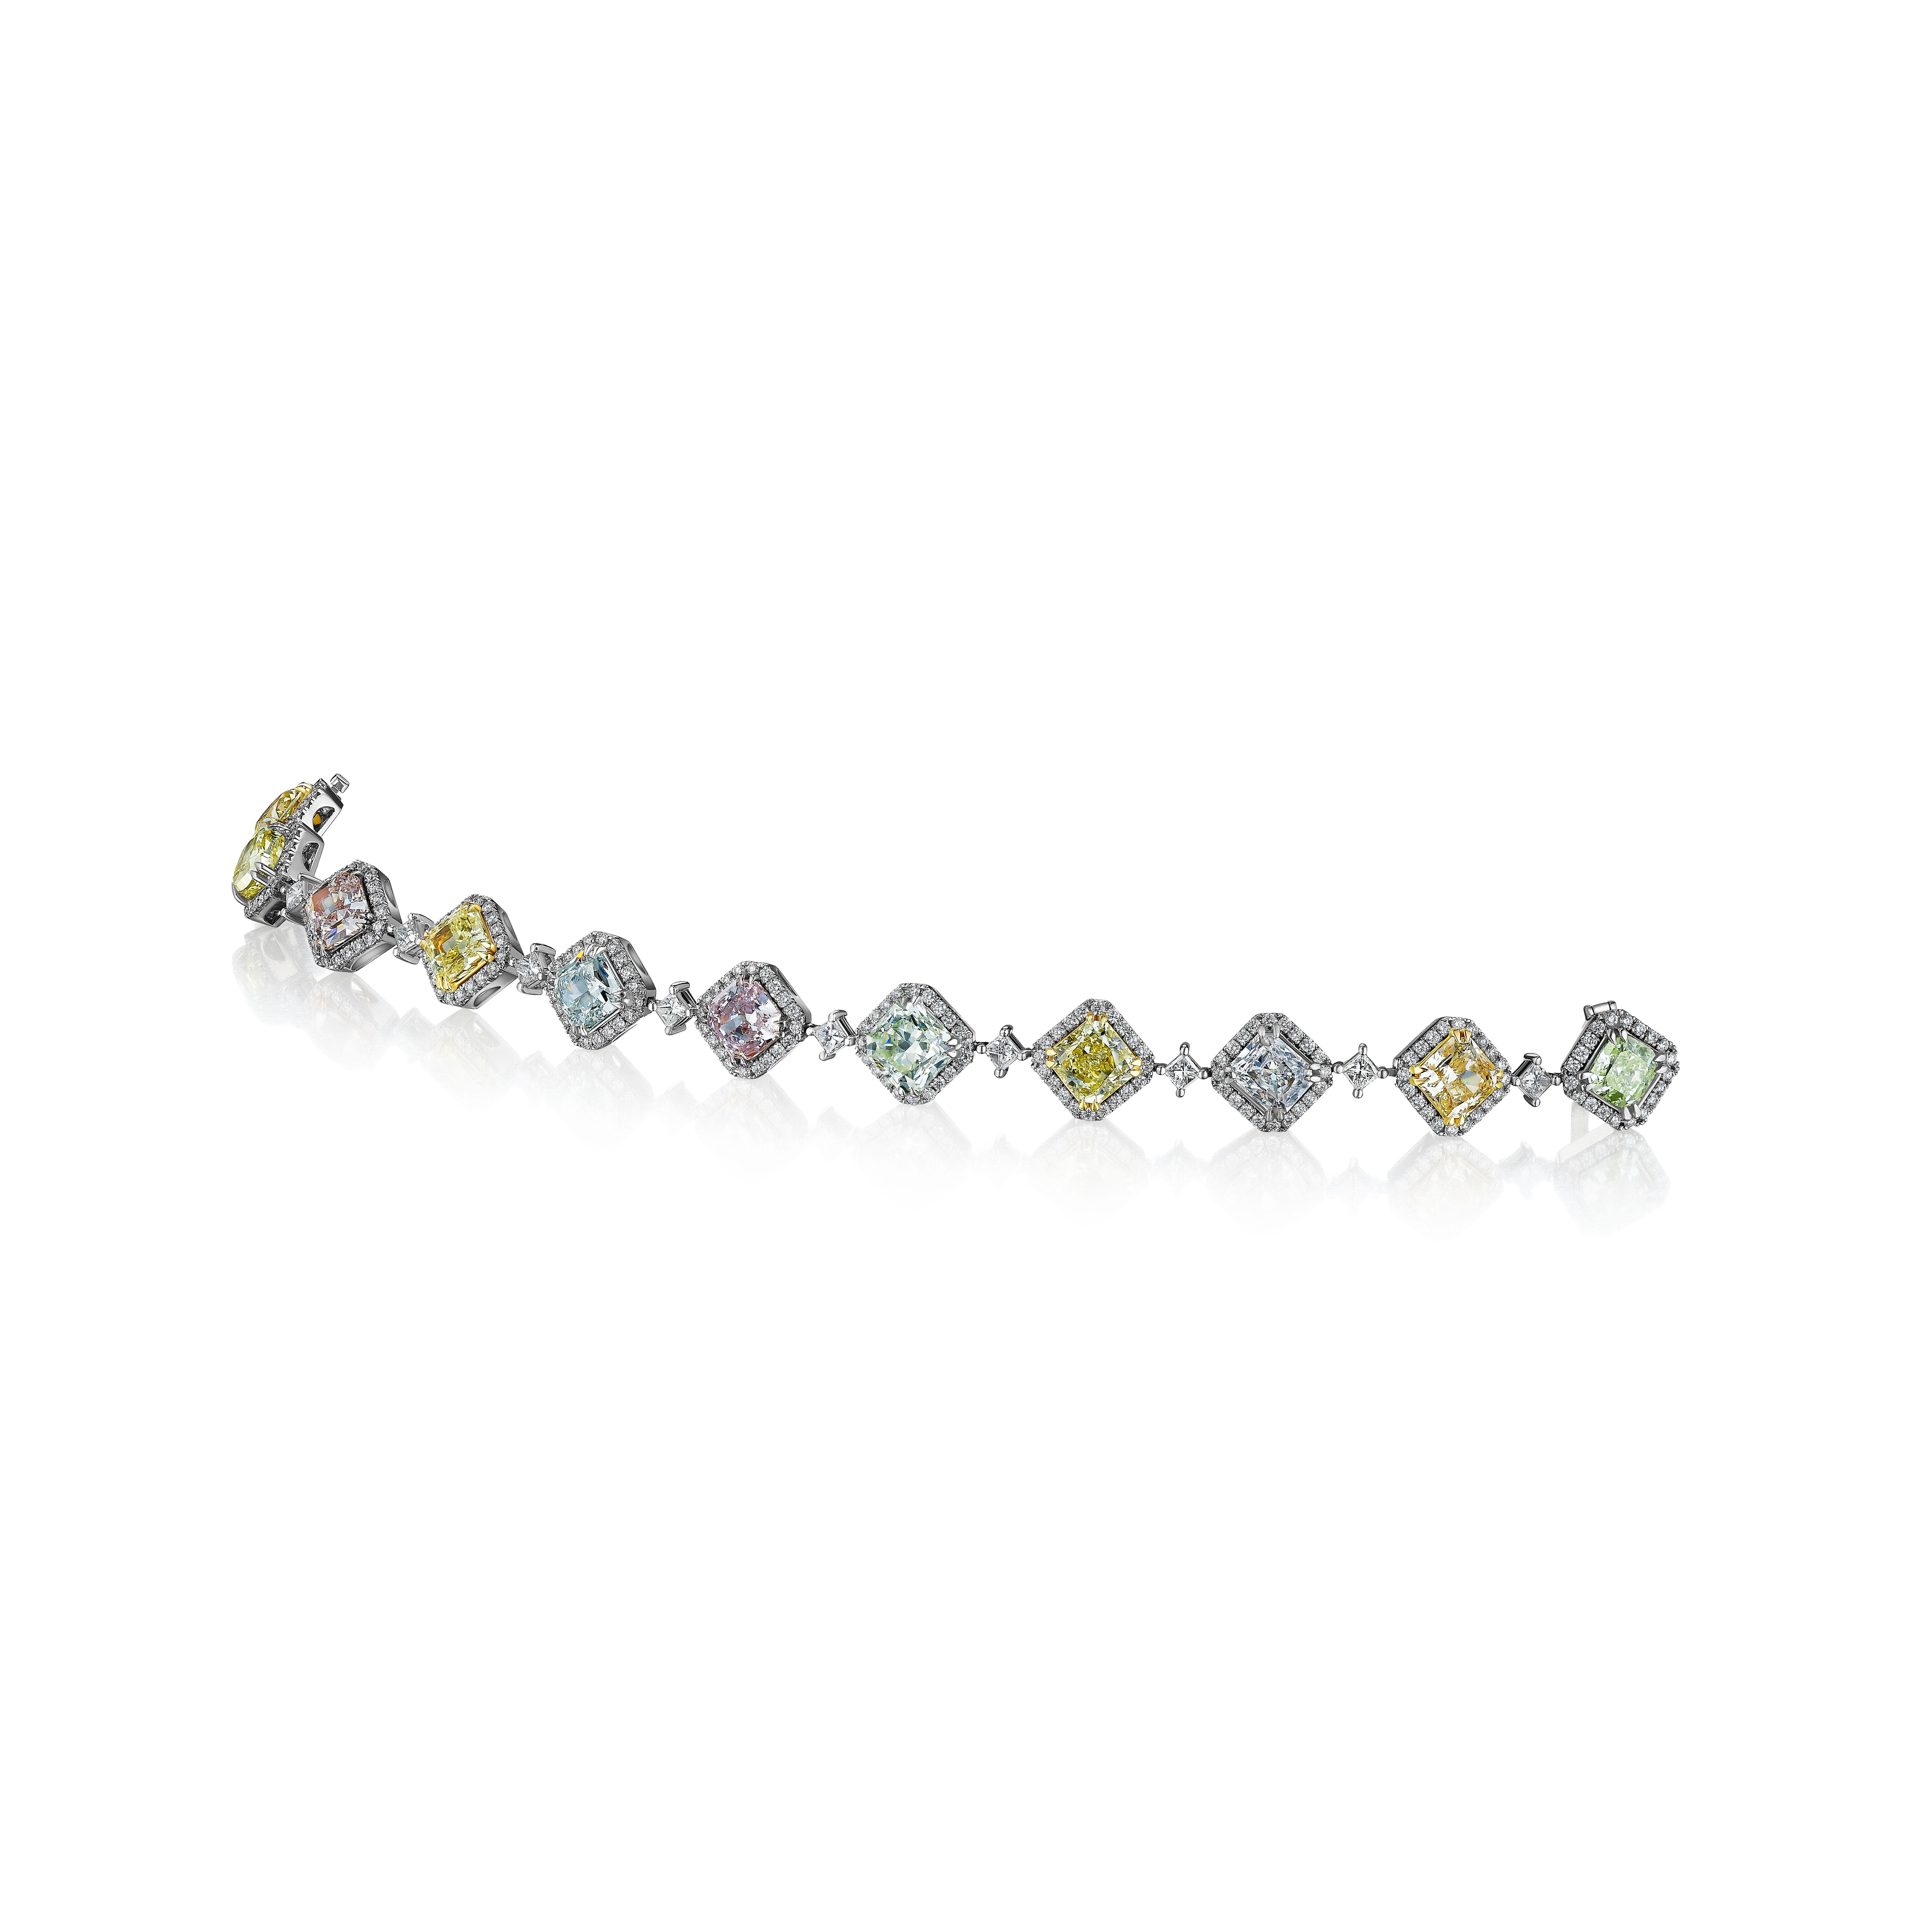 A very unique and multi colored diamond bracelet with Pink, Green Yellow, Orange and White Diamonds. Rare colors and all natural. 11 diamonds each weighing from 1.03-2.04 carats and each certified by GIA totaling 15.17 carats. 
Surrounded by around